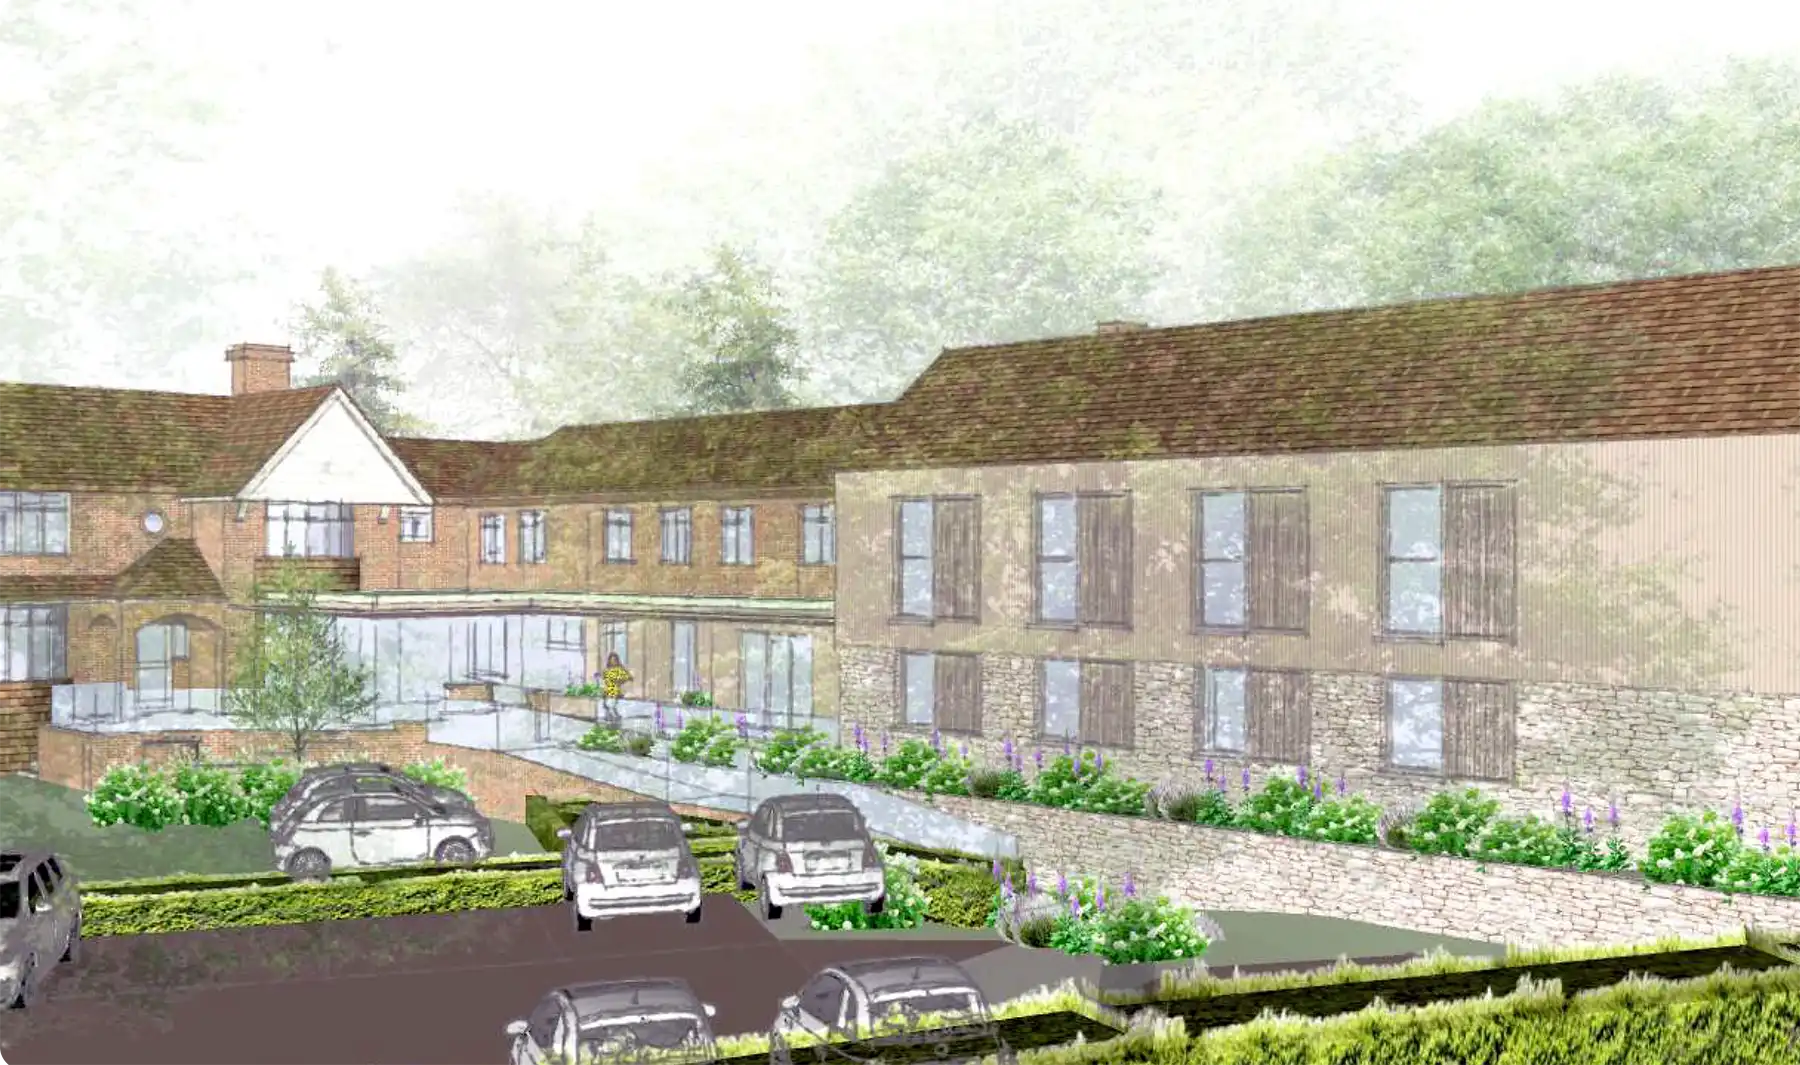 How the extension at Casterbridge Lodge could look. Picture: WDA/Dorset Council